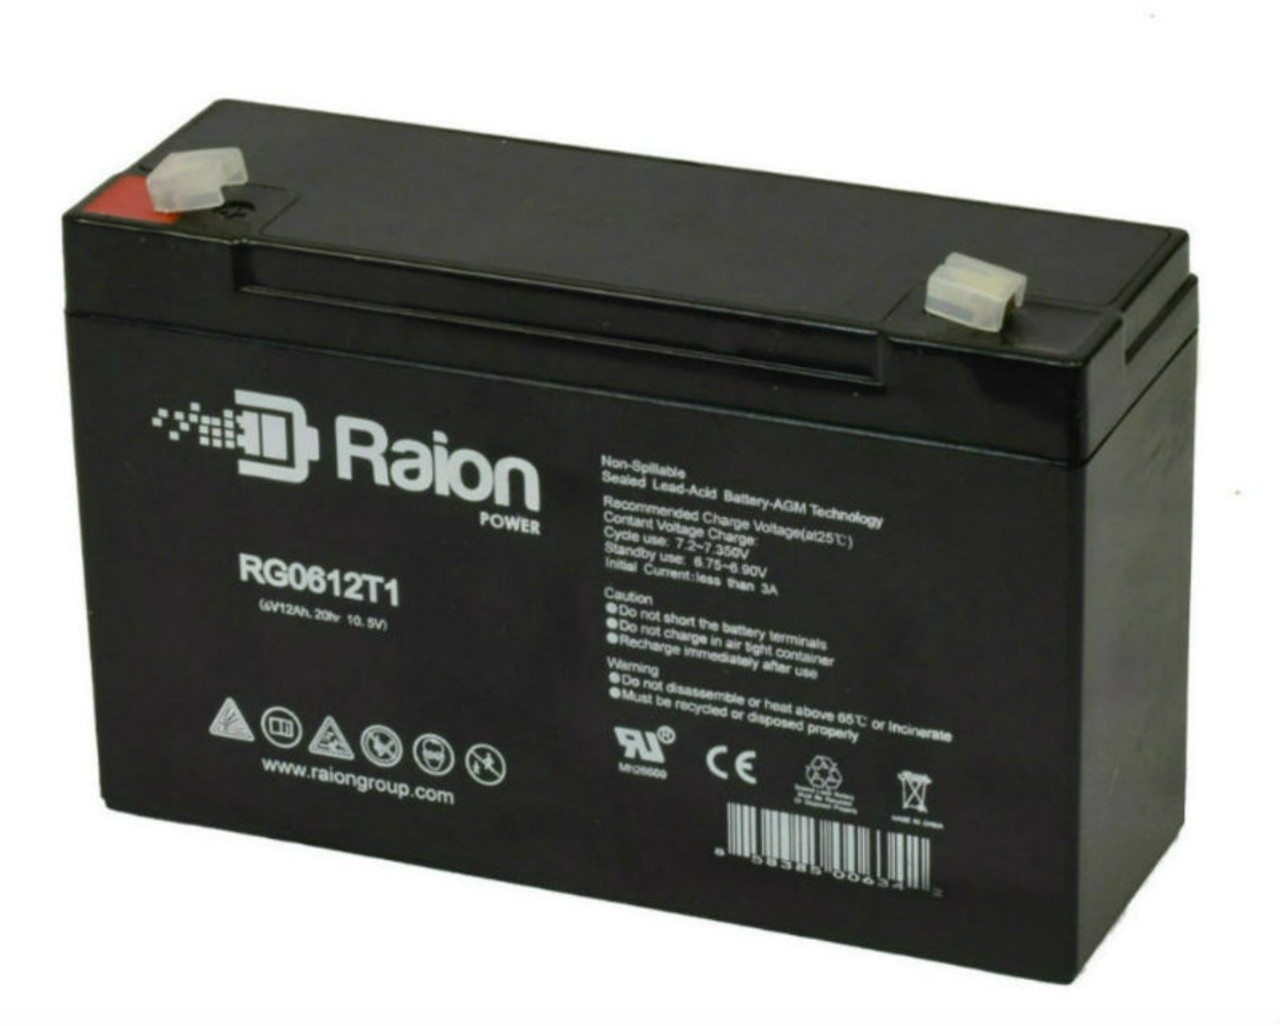 Raion Power RG06120T1 Replacement Battery for Enersys 6HX50